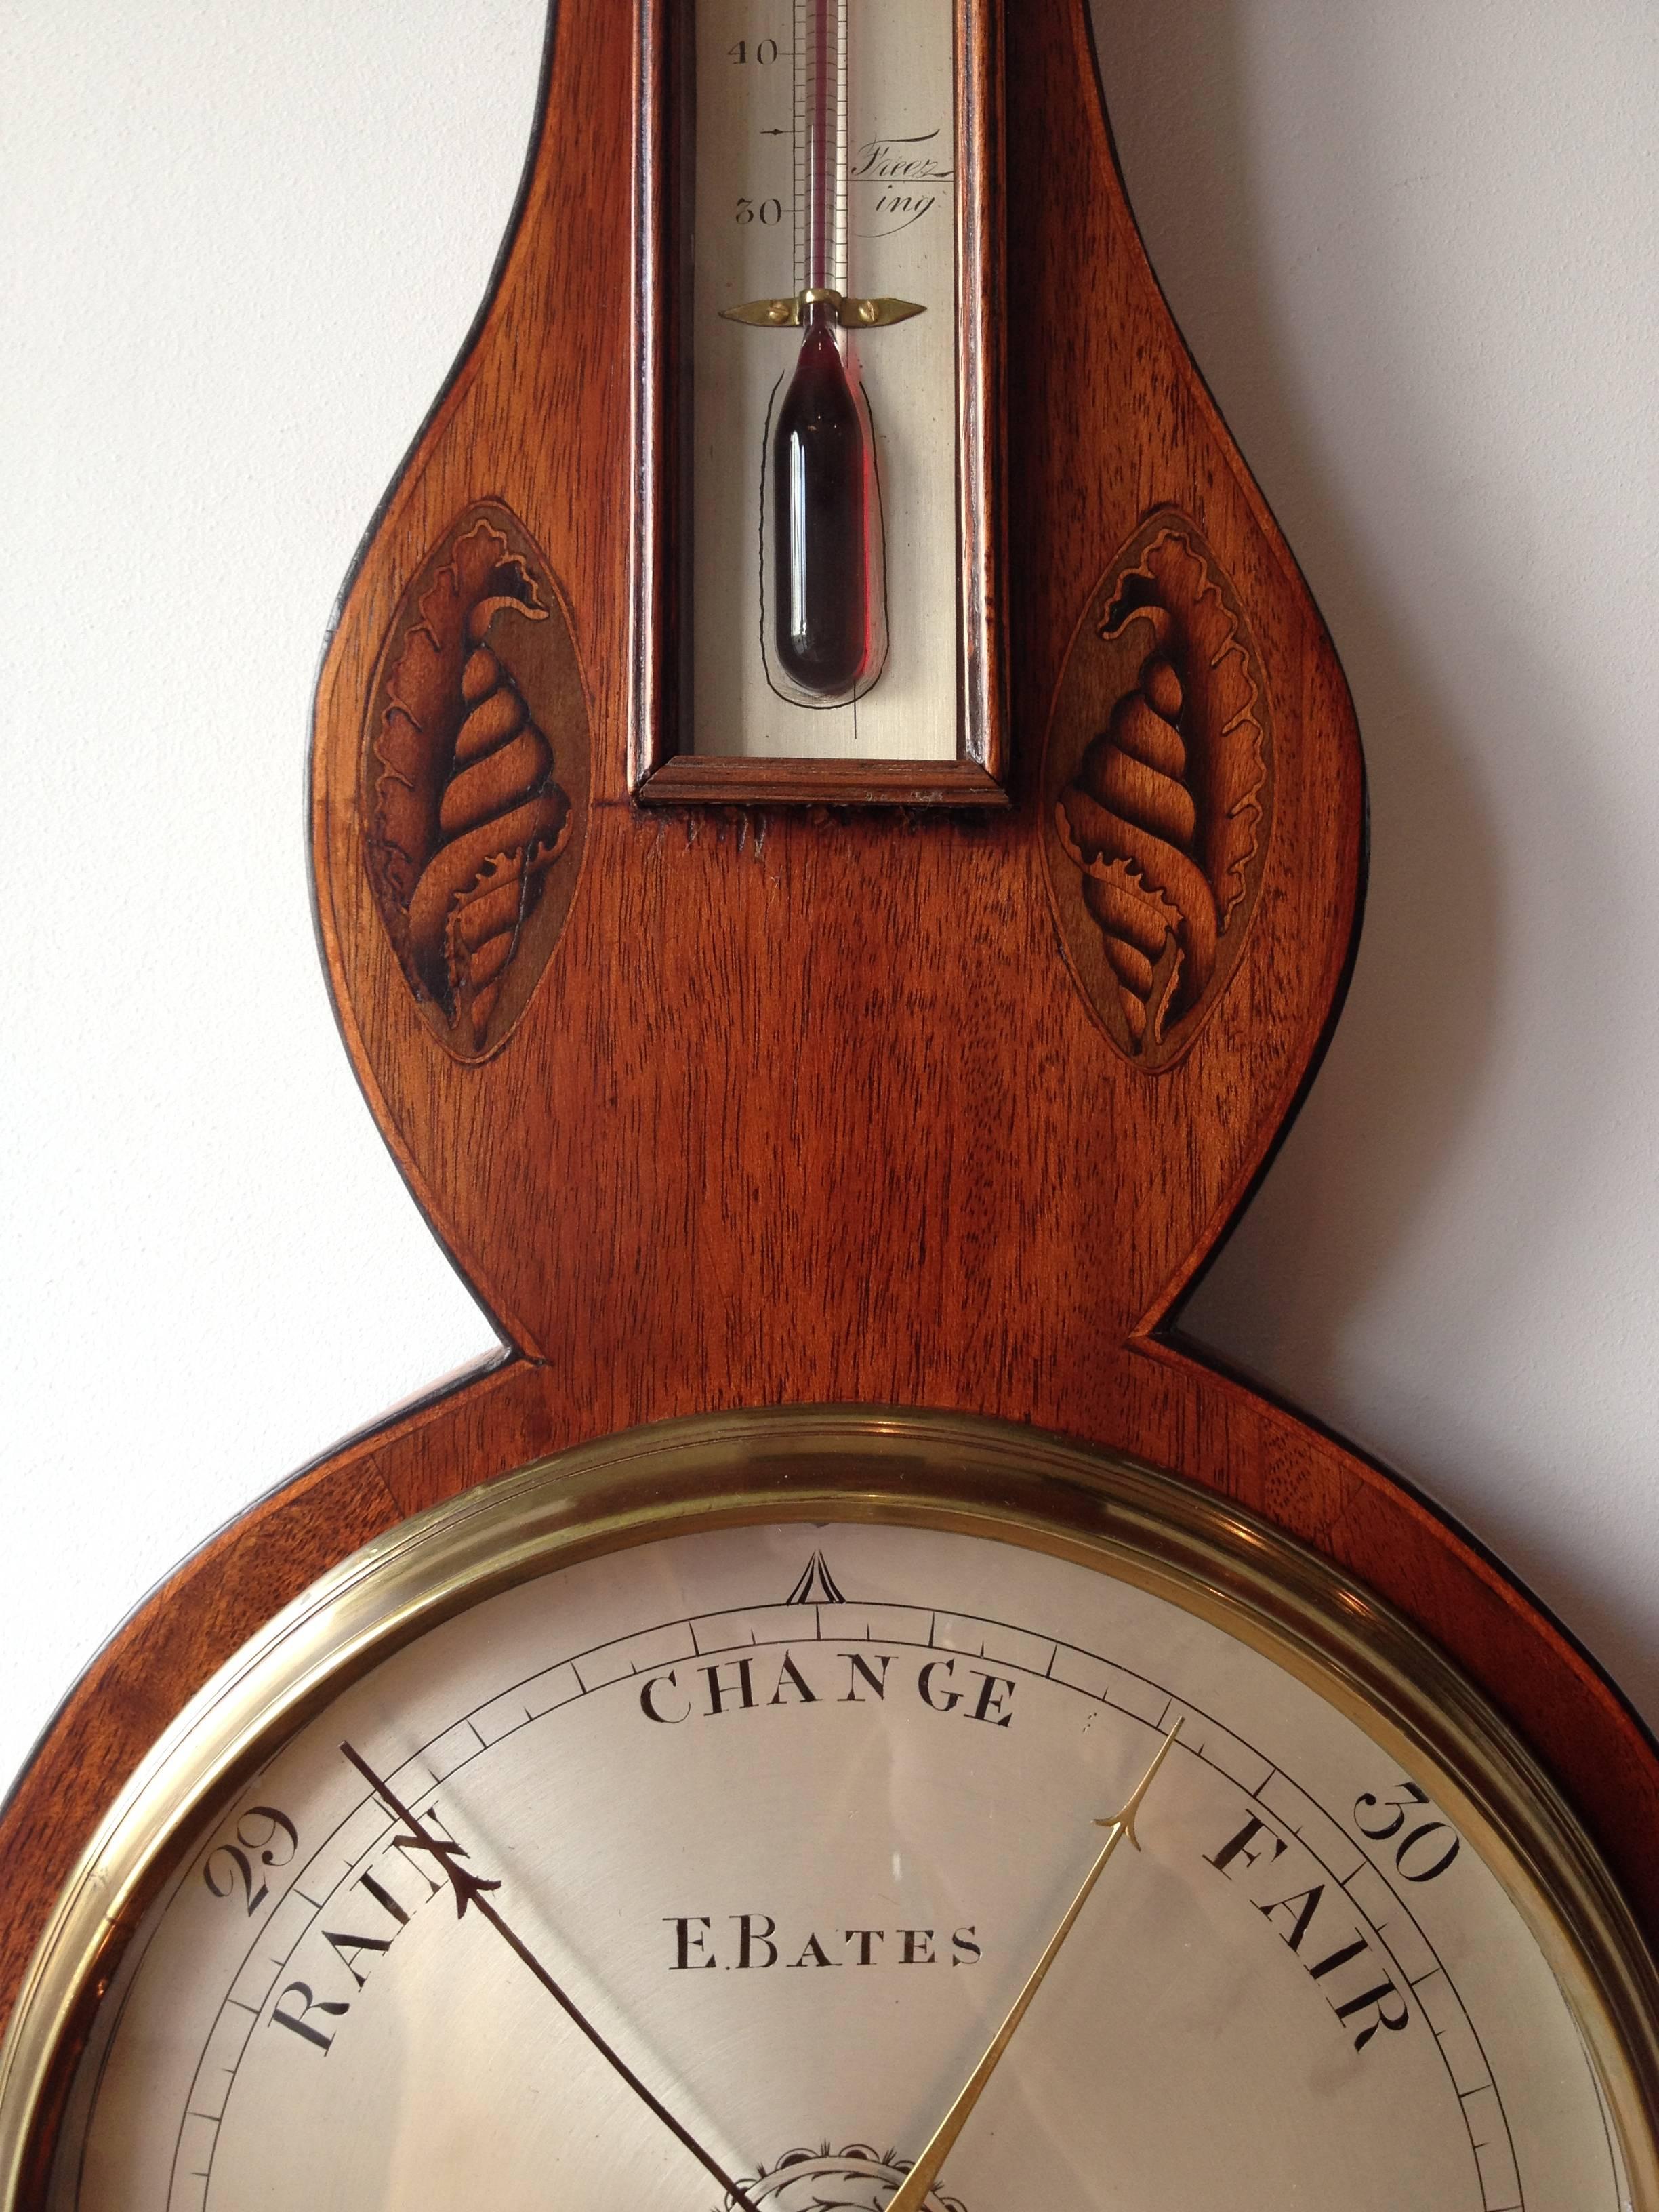 A late Georgian mahogany wheel barometer with satinwood marquetry inlay by Bates of Kettering. 

The mahogany case has satinwood stringing and marquetry shell and sunflower inlay decoration and is crowned by an architectural pediment with central